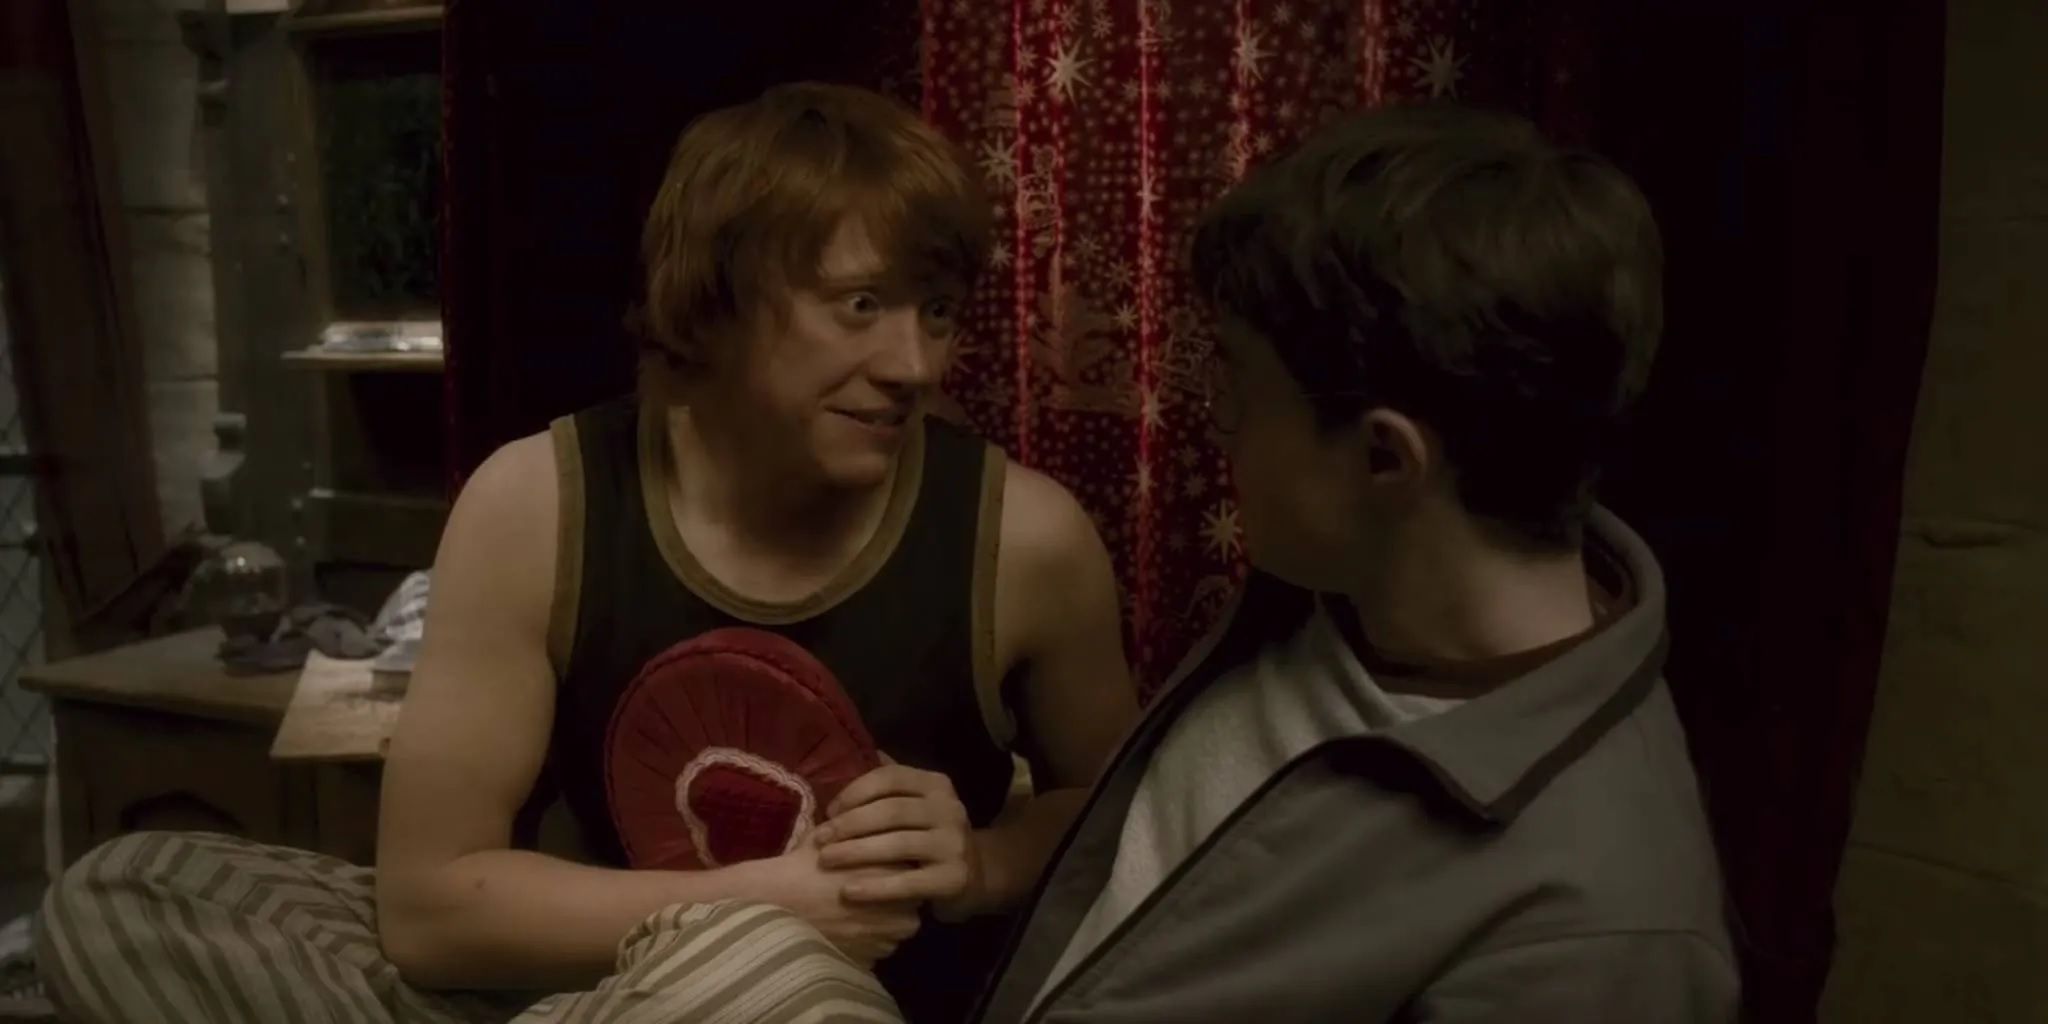 Ron Weasley under Love Potion influence smiling while holding chocolates